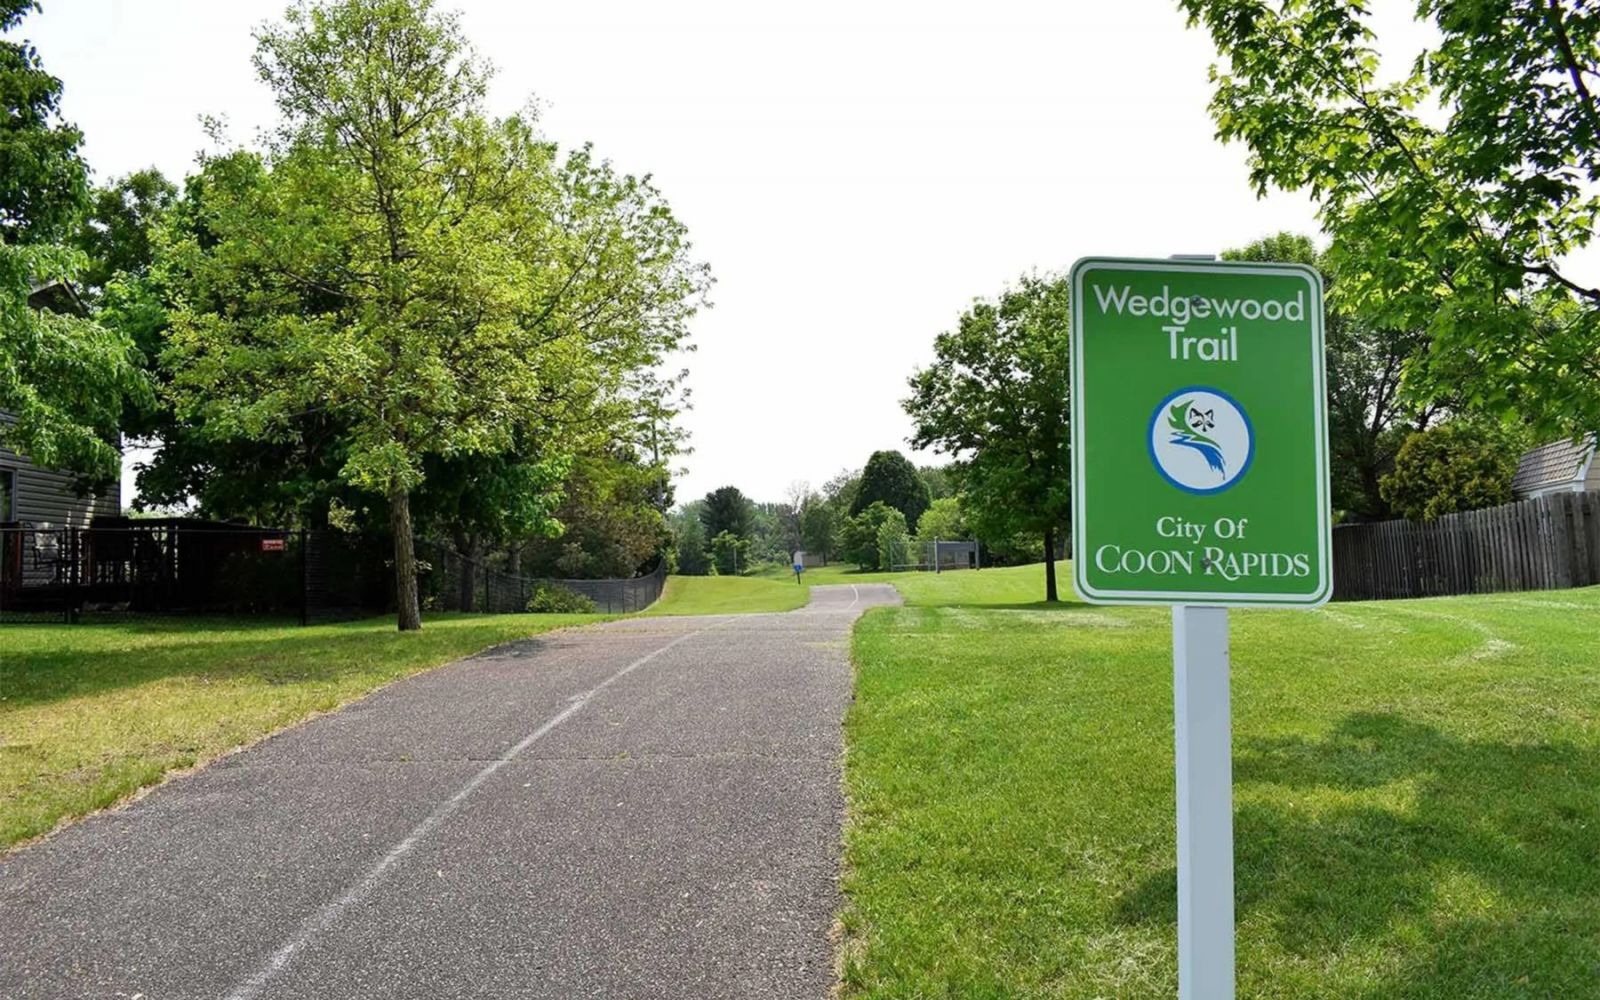 Wedgewood trail sign in Coon Rapids, MN